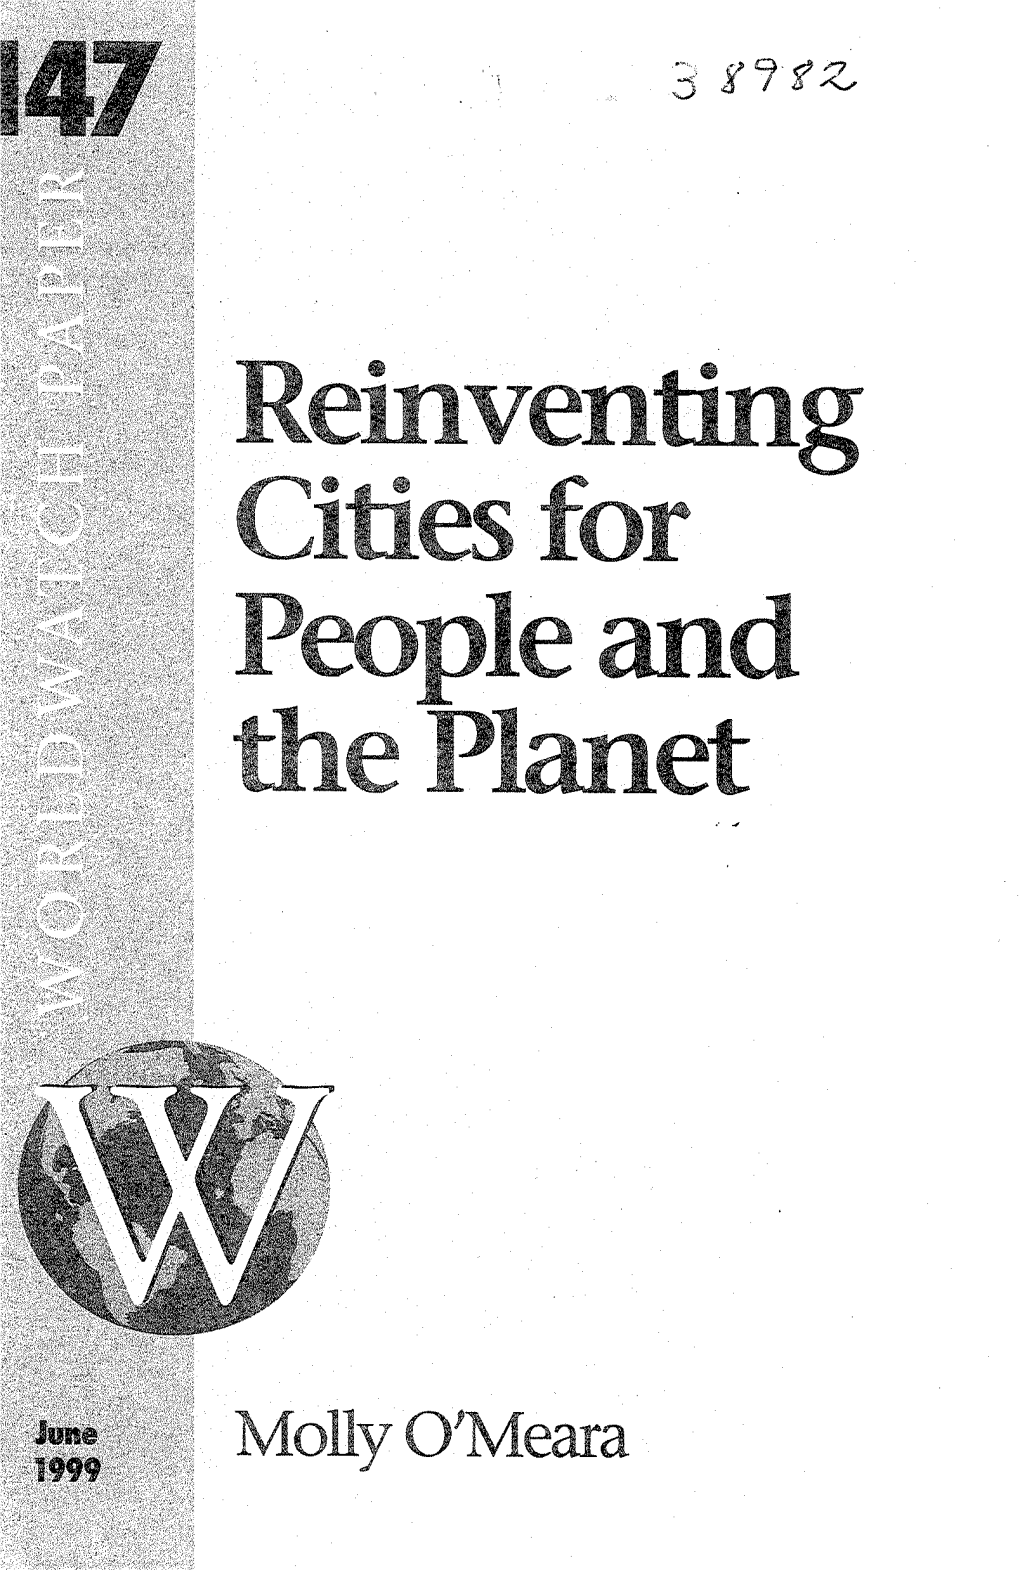 Reinventing Cities for People and the Planet